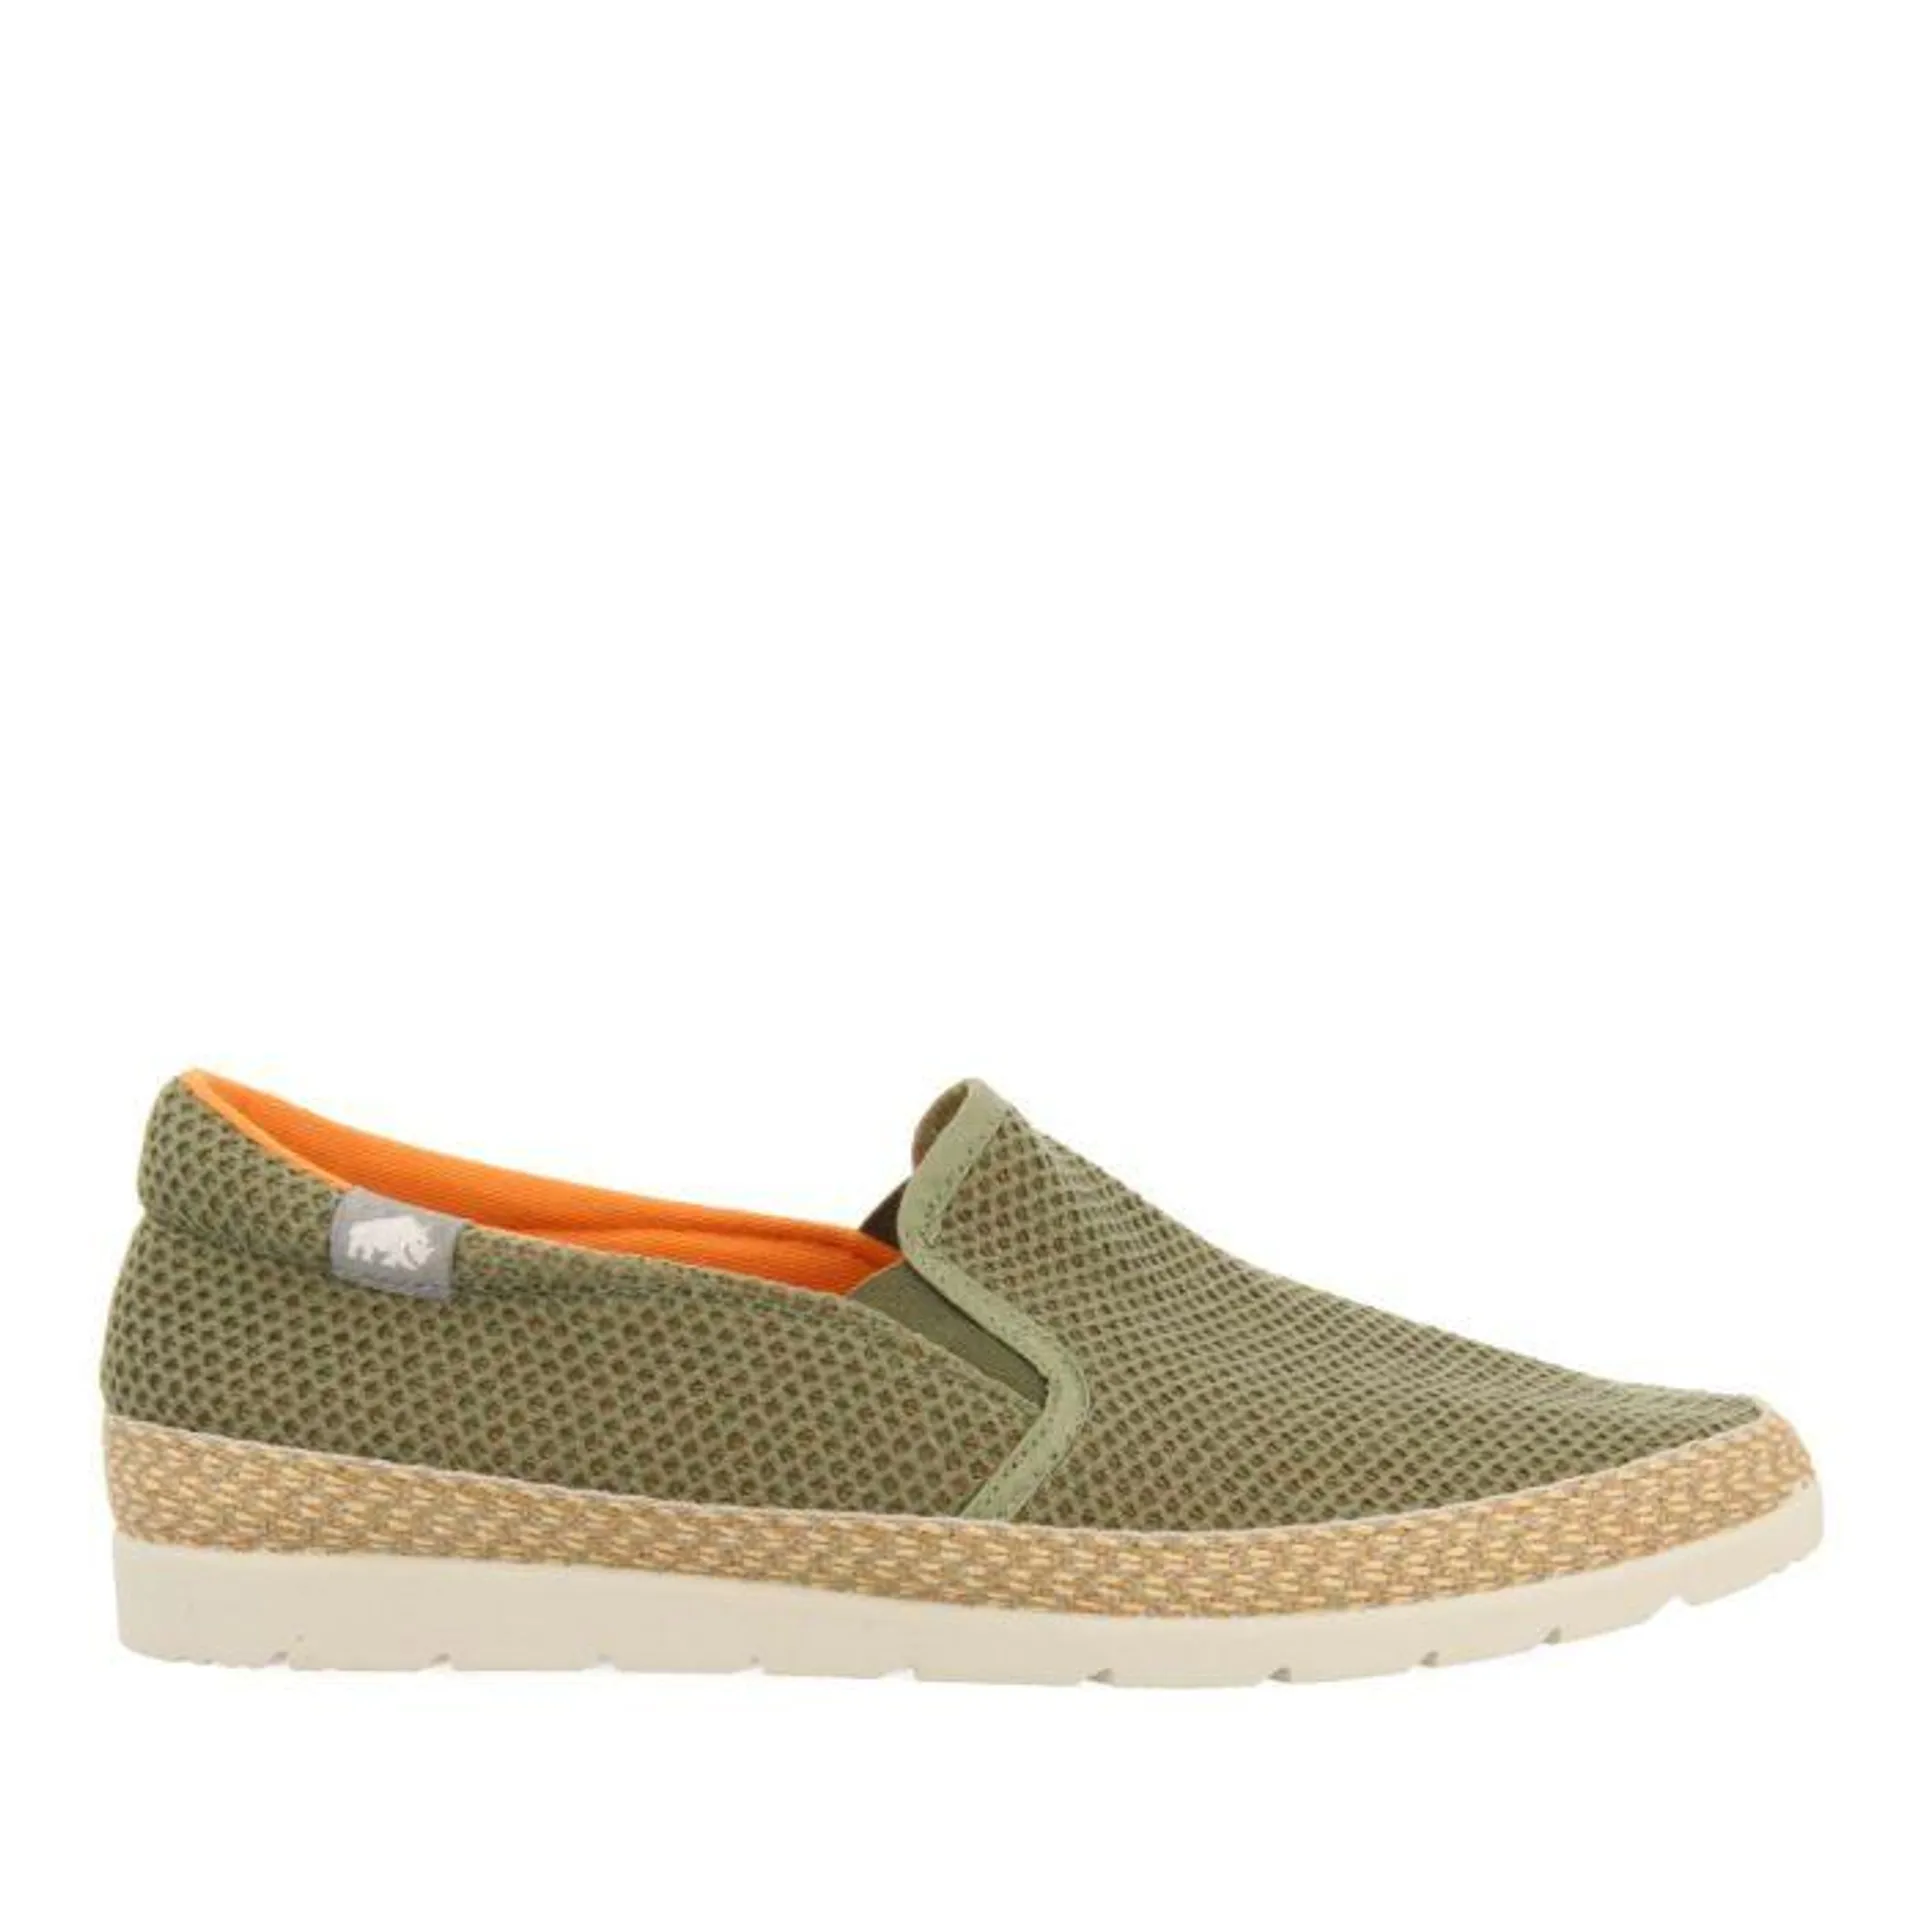 KHAKI MESH ESPADRILLES WITH RECYCLED COTTON FOR MEN YACOLT